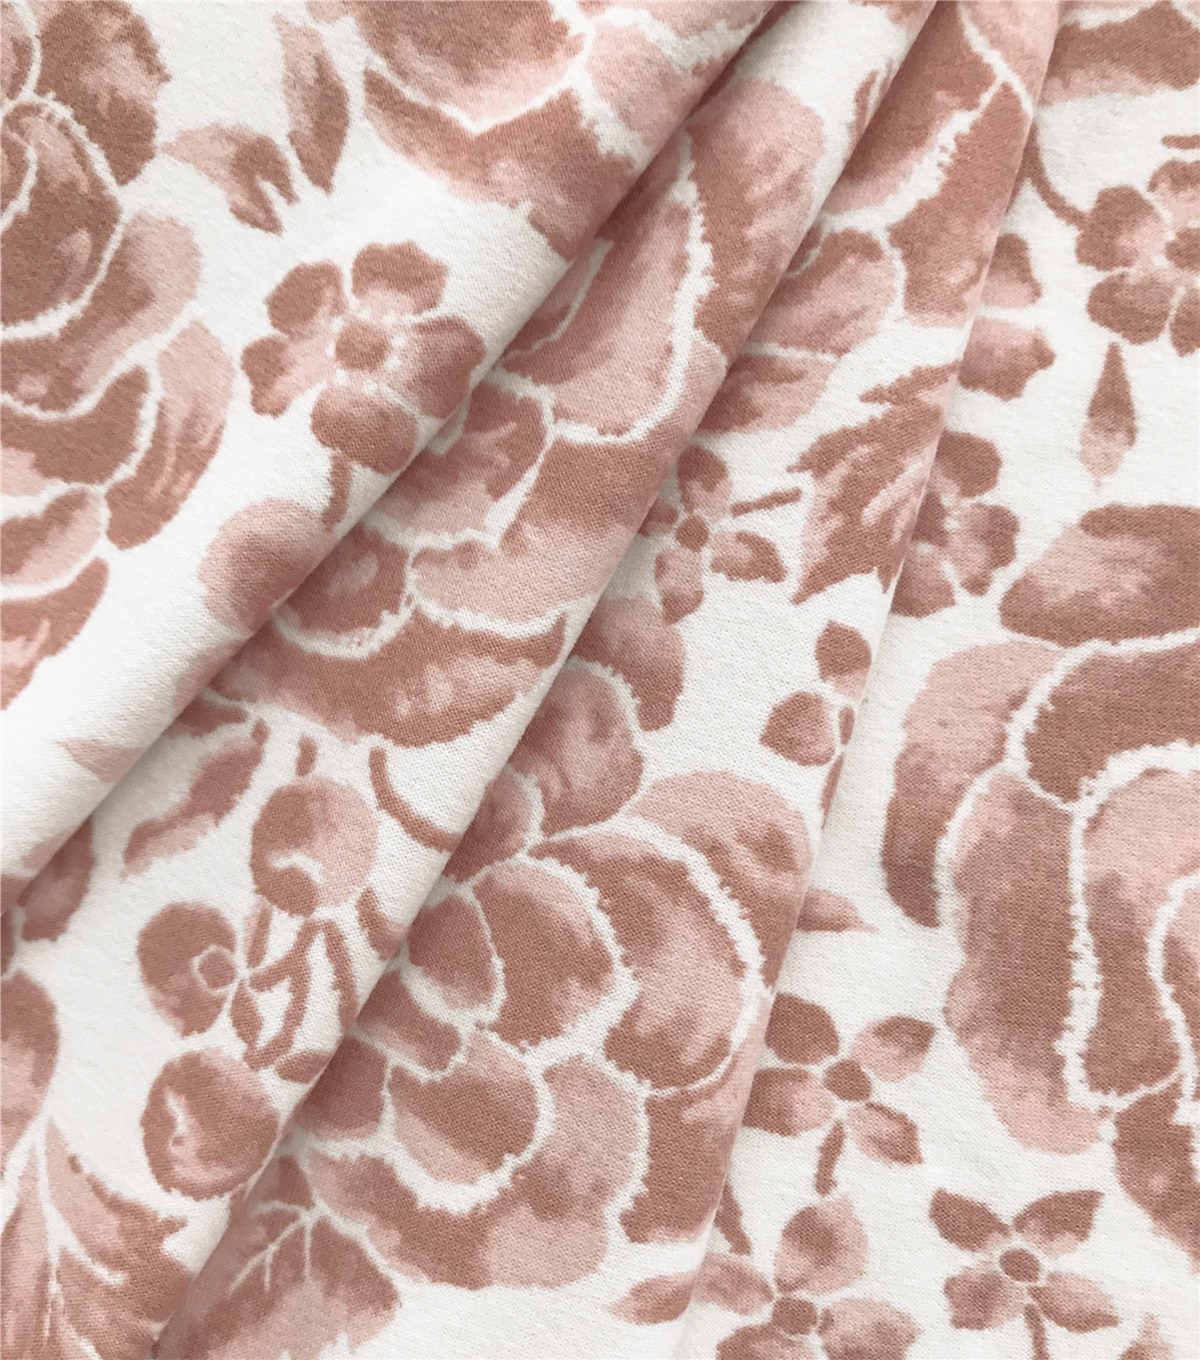 Knit Polyester Spandex Fabric-Pink Large Floral | JOANN